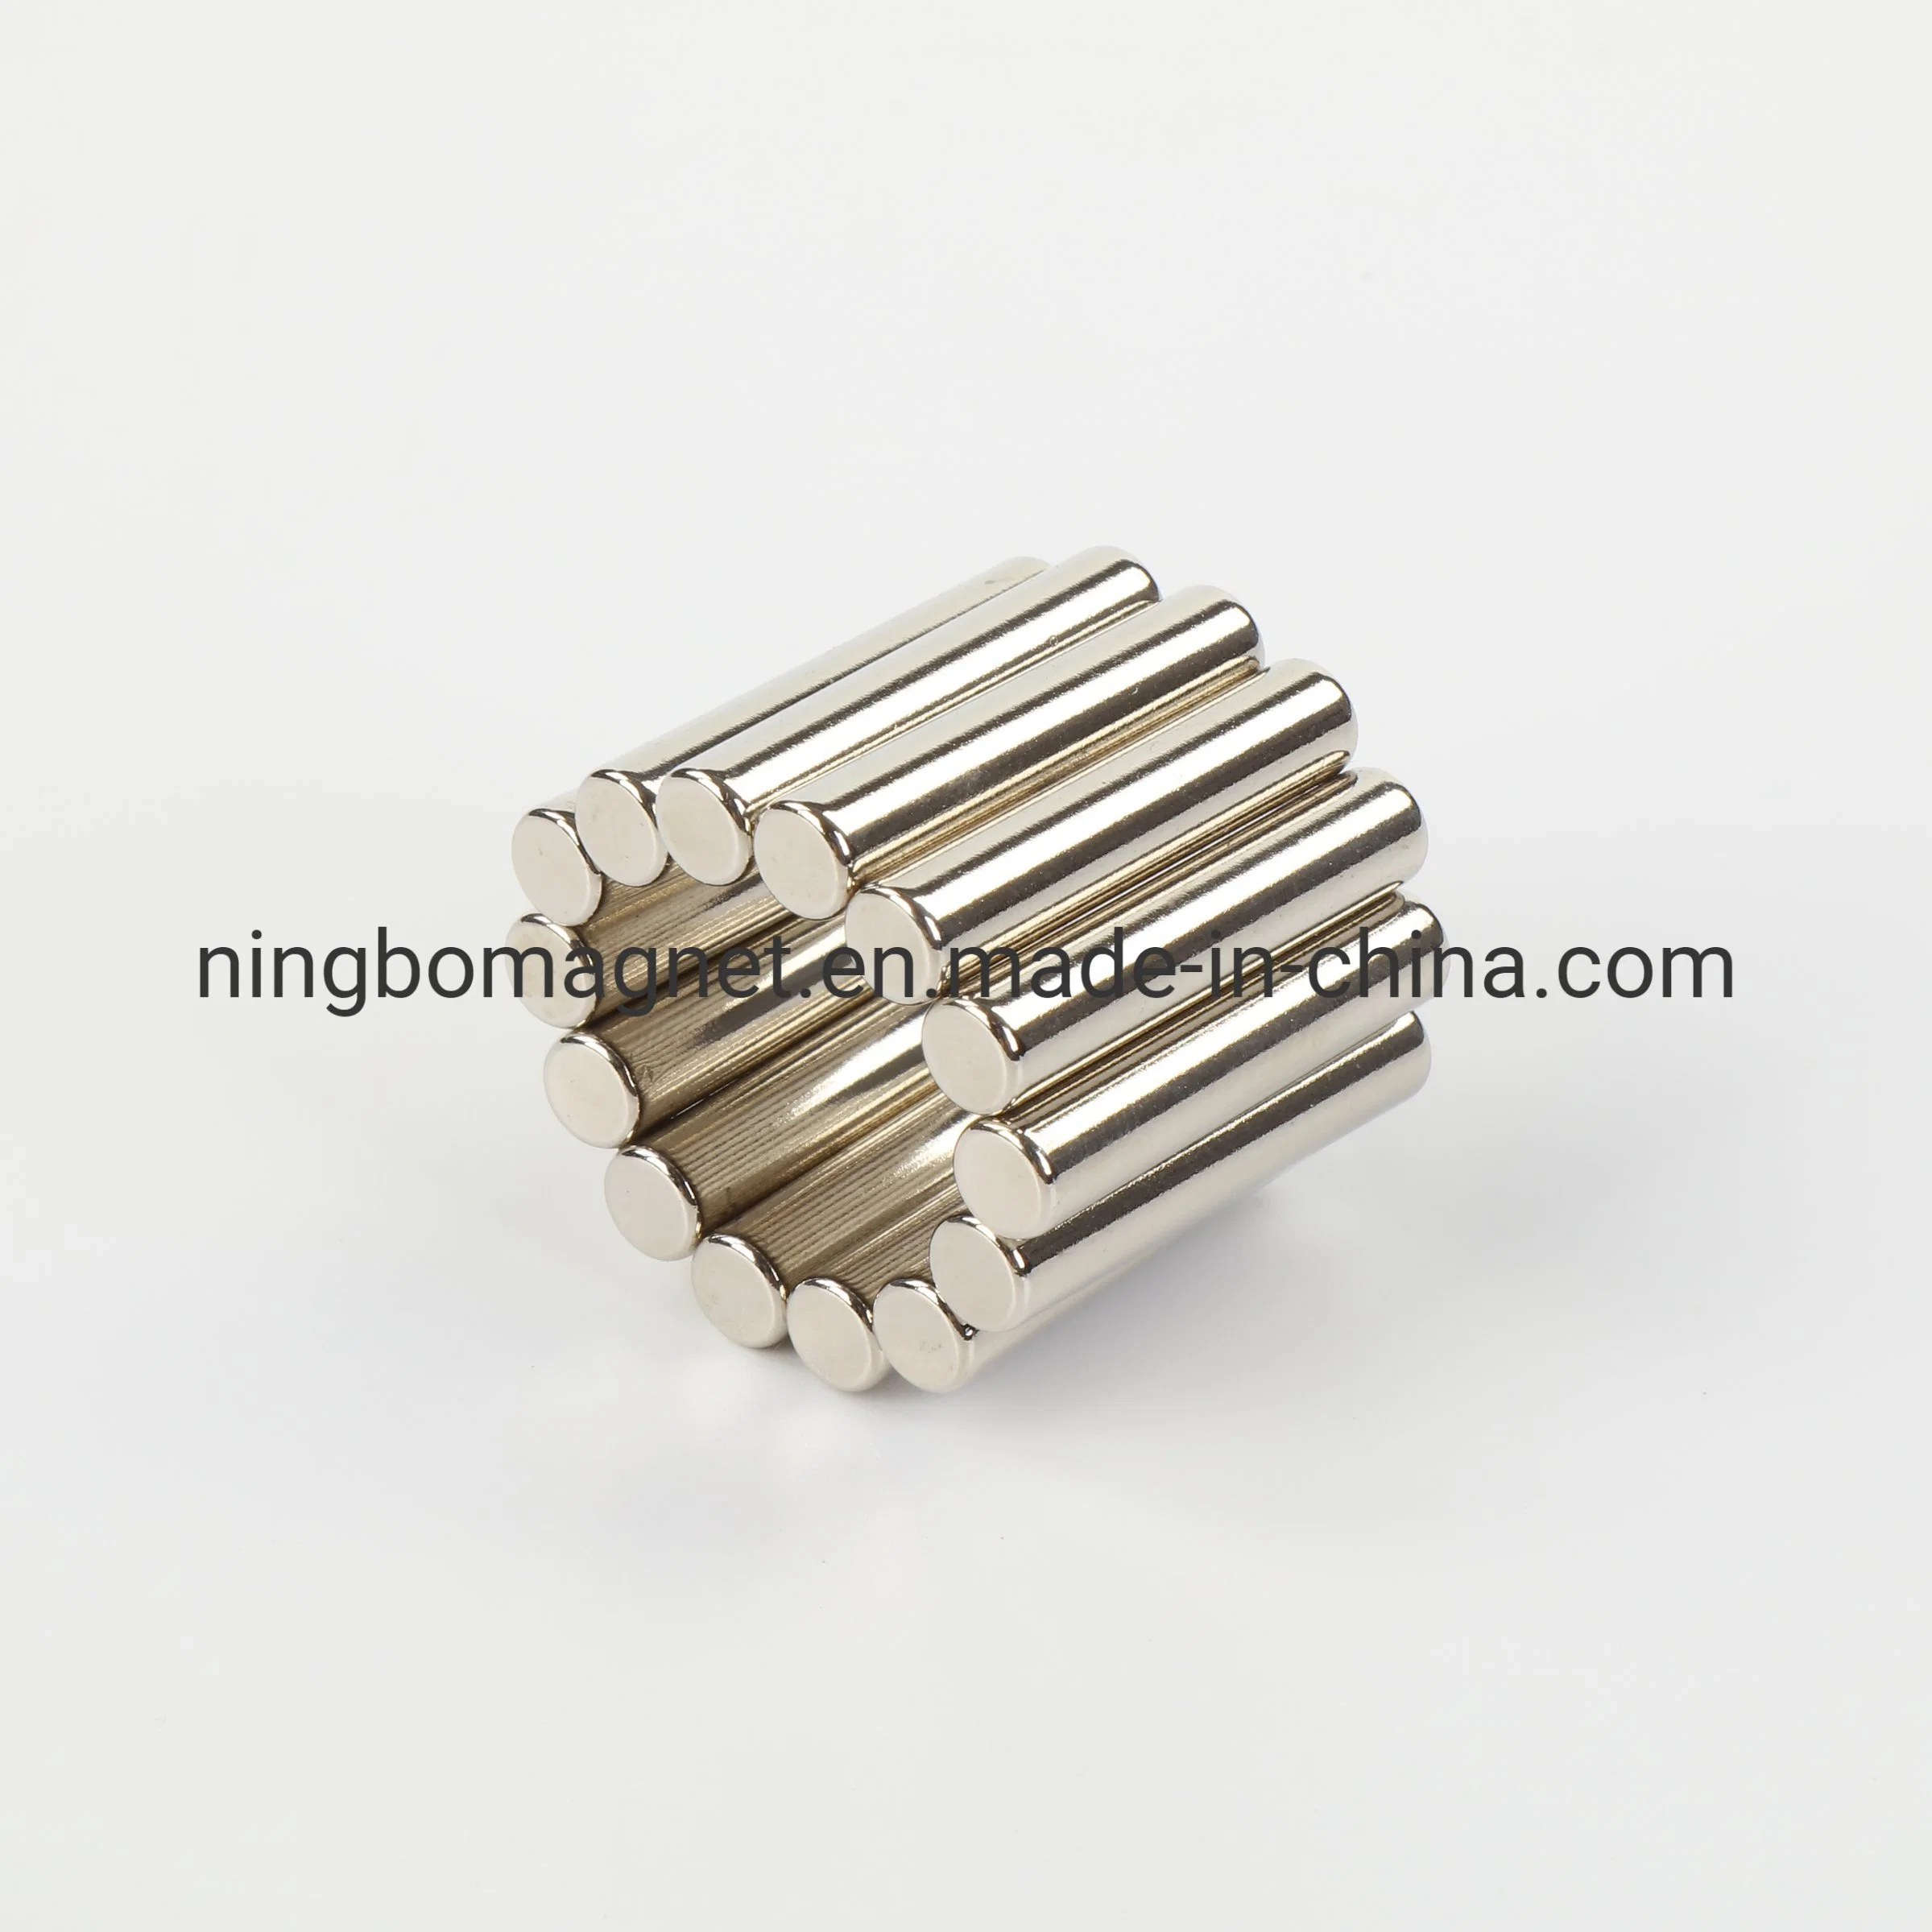 Hot Sale Strong NdFeB Permanent Neodymium Cylinder Magnet for Industrial